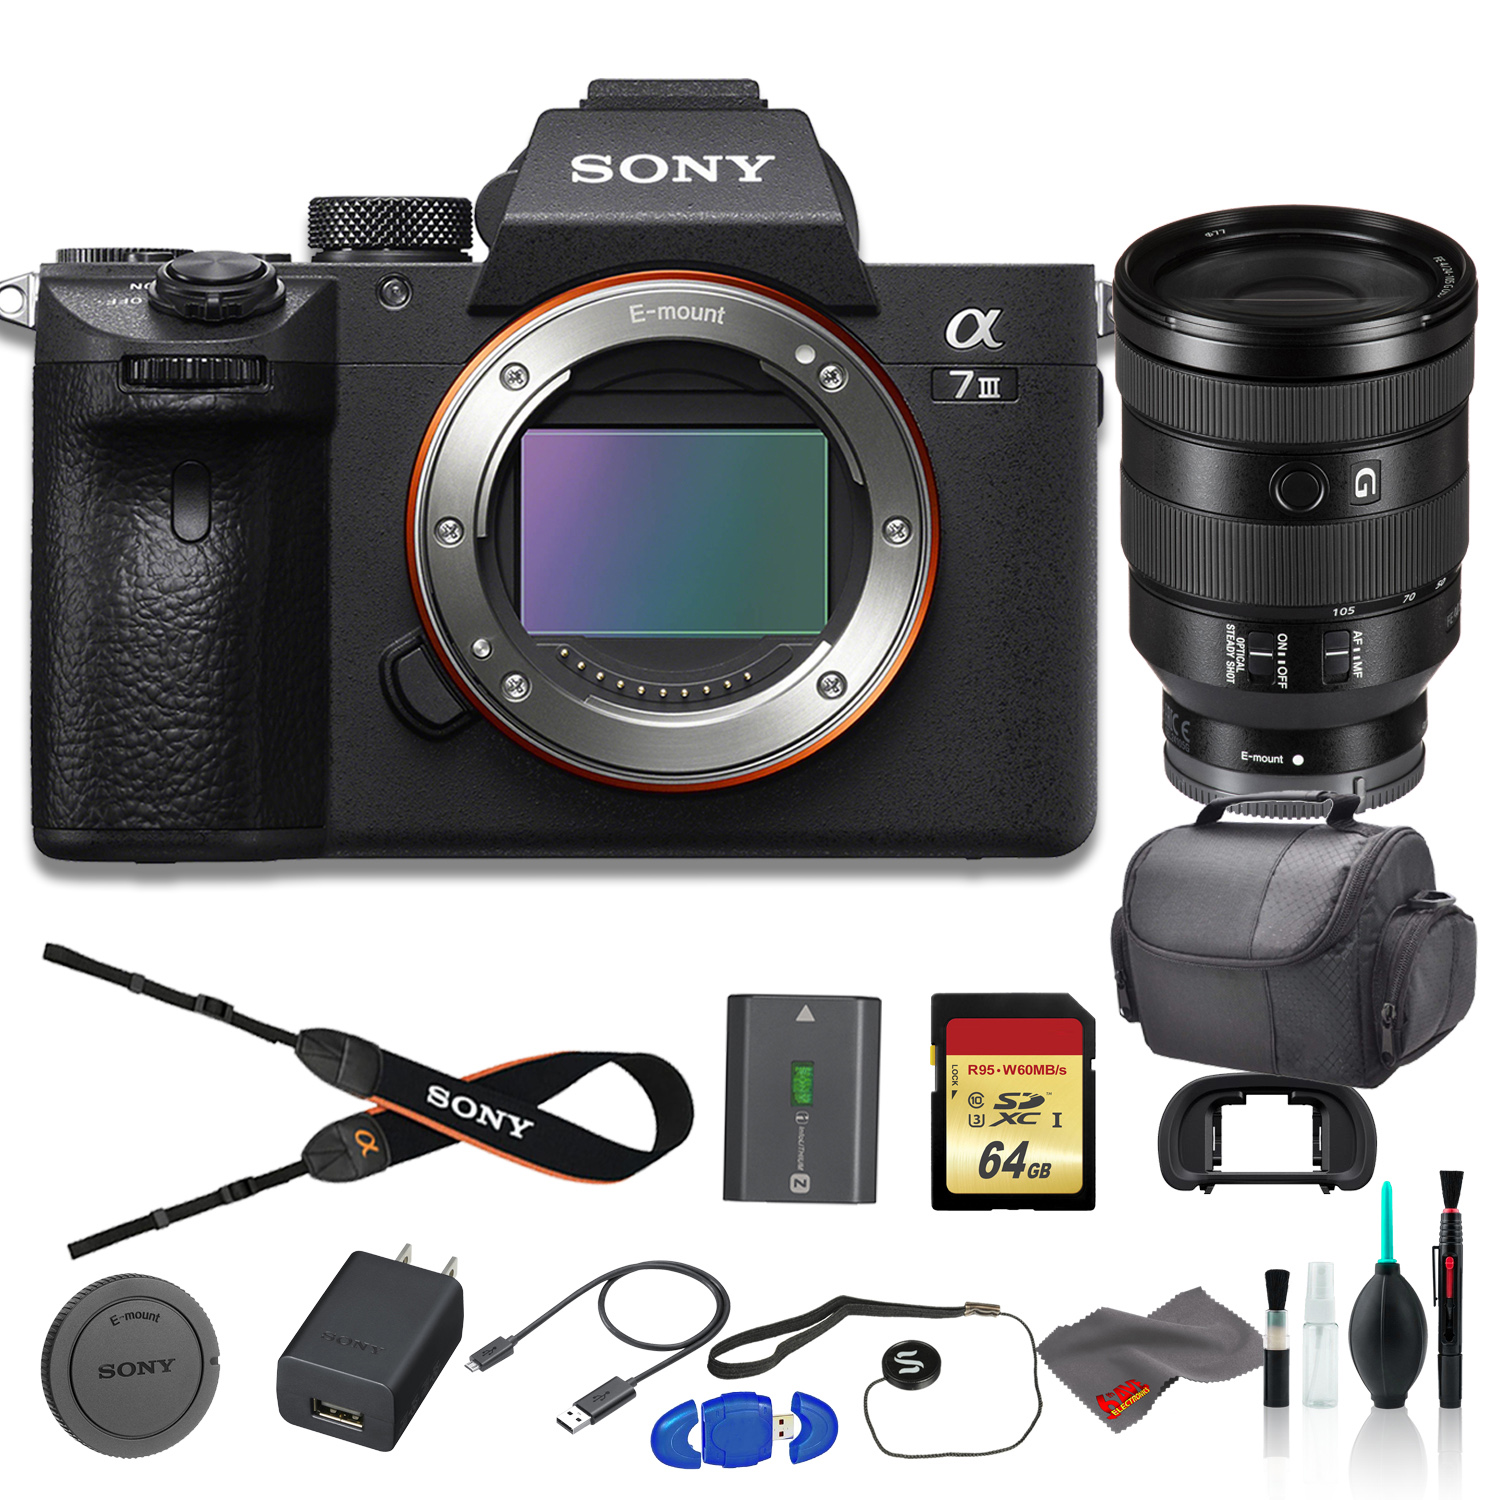 Sony Alpha a7 III Mirrorless Digital Camera Bundle - With Sony FE 24-105mm f/4 Lens, Bag, 64GB Memory Card, Memory Card Reader and More - image 1 of 2